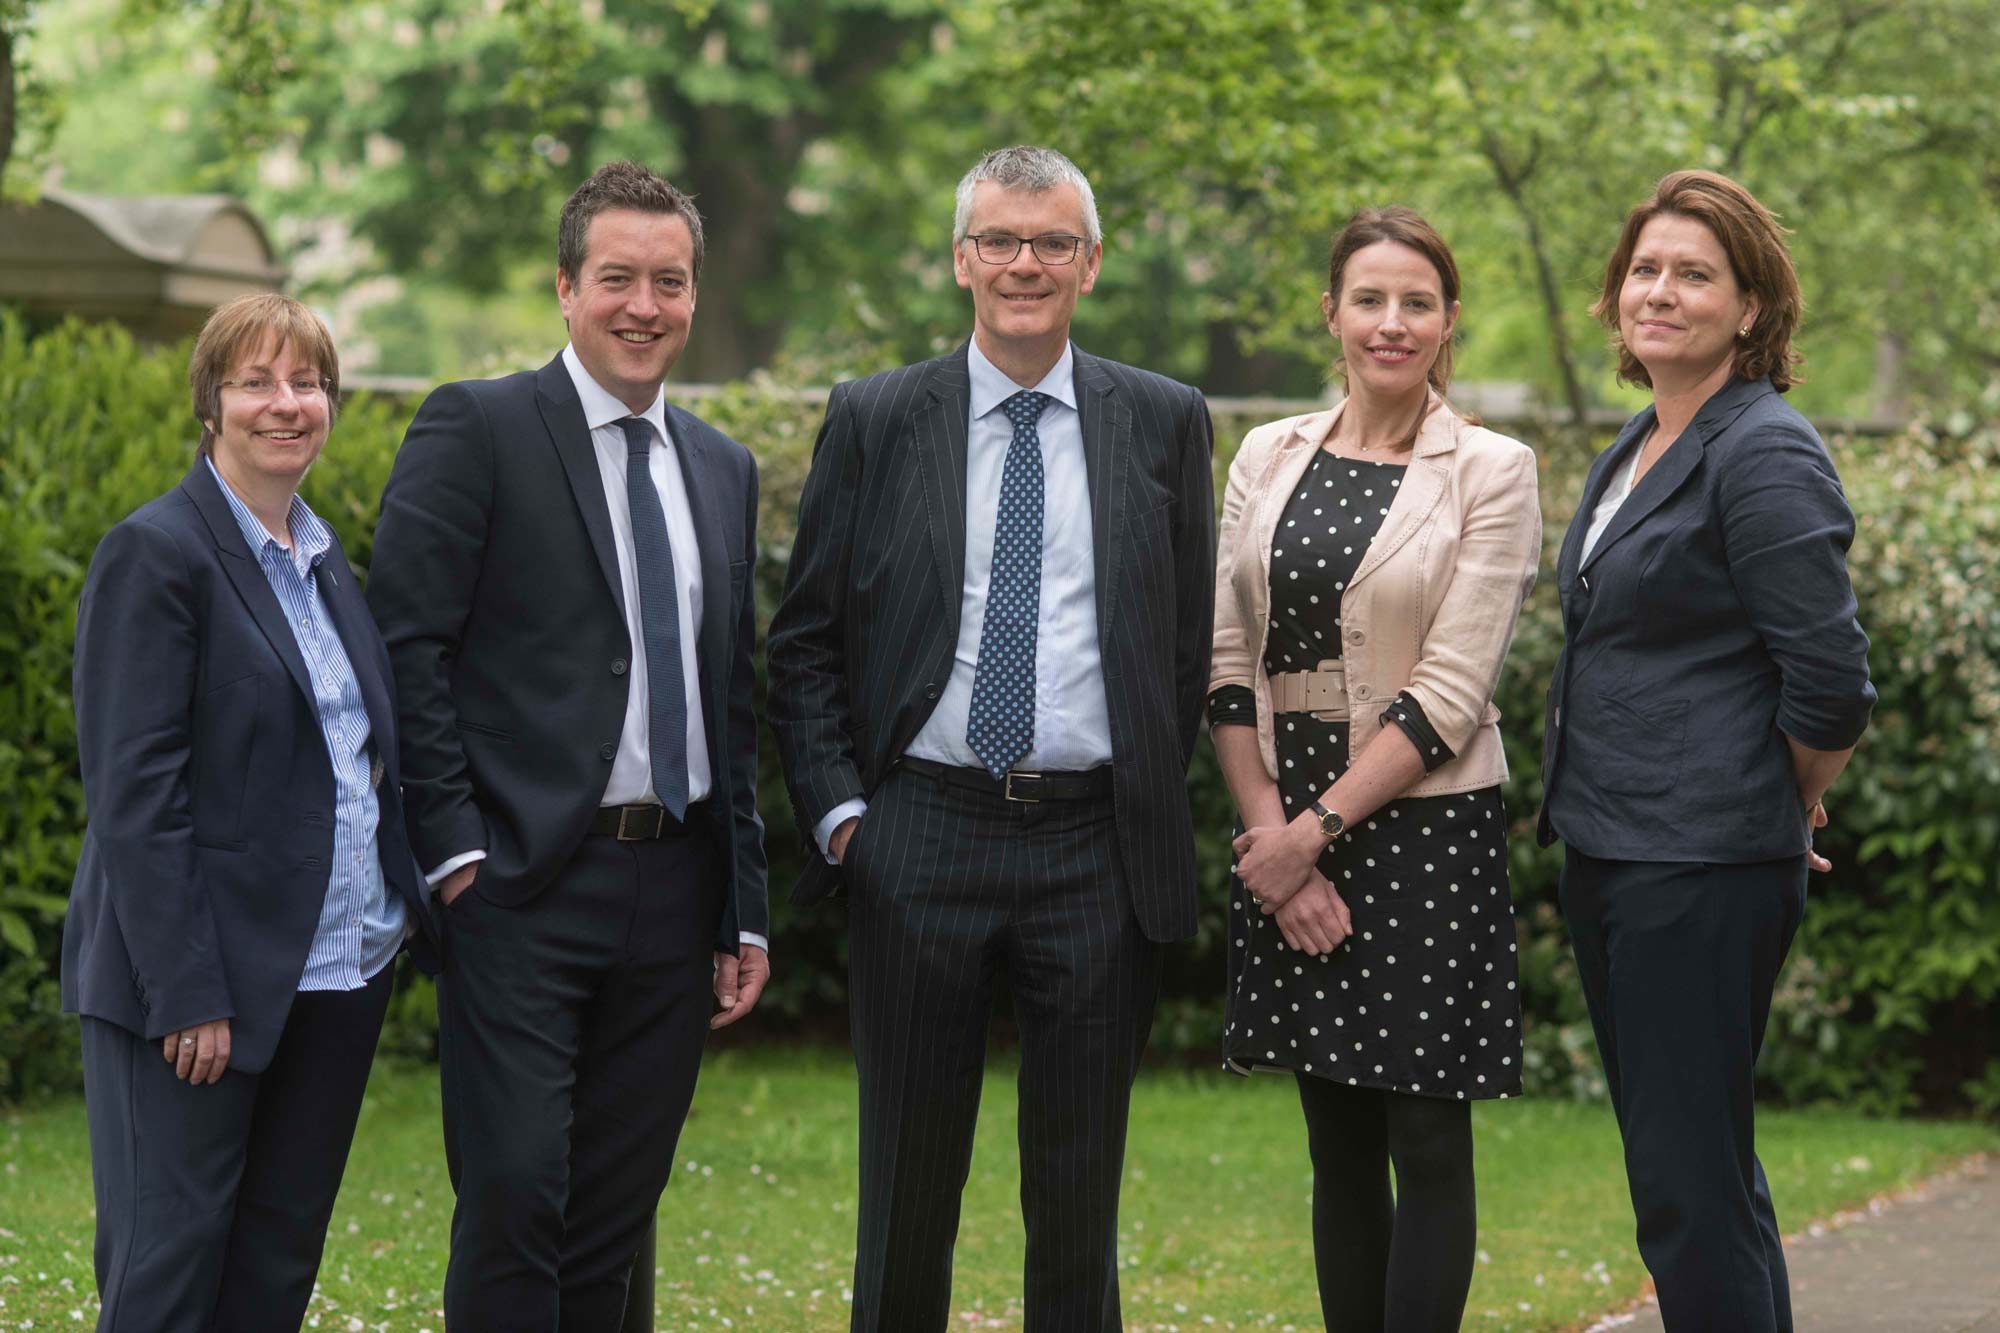 The Partners at Saffery Champness in Harrogate are offering post A’Level candidates an alternative to university. L-R Sally Thomas, Jonathan Davis, Martin Holden, Sally Appleton and Alison Robinson